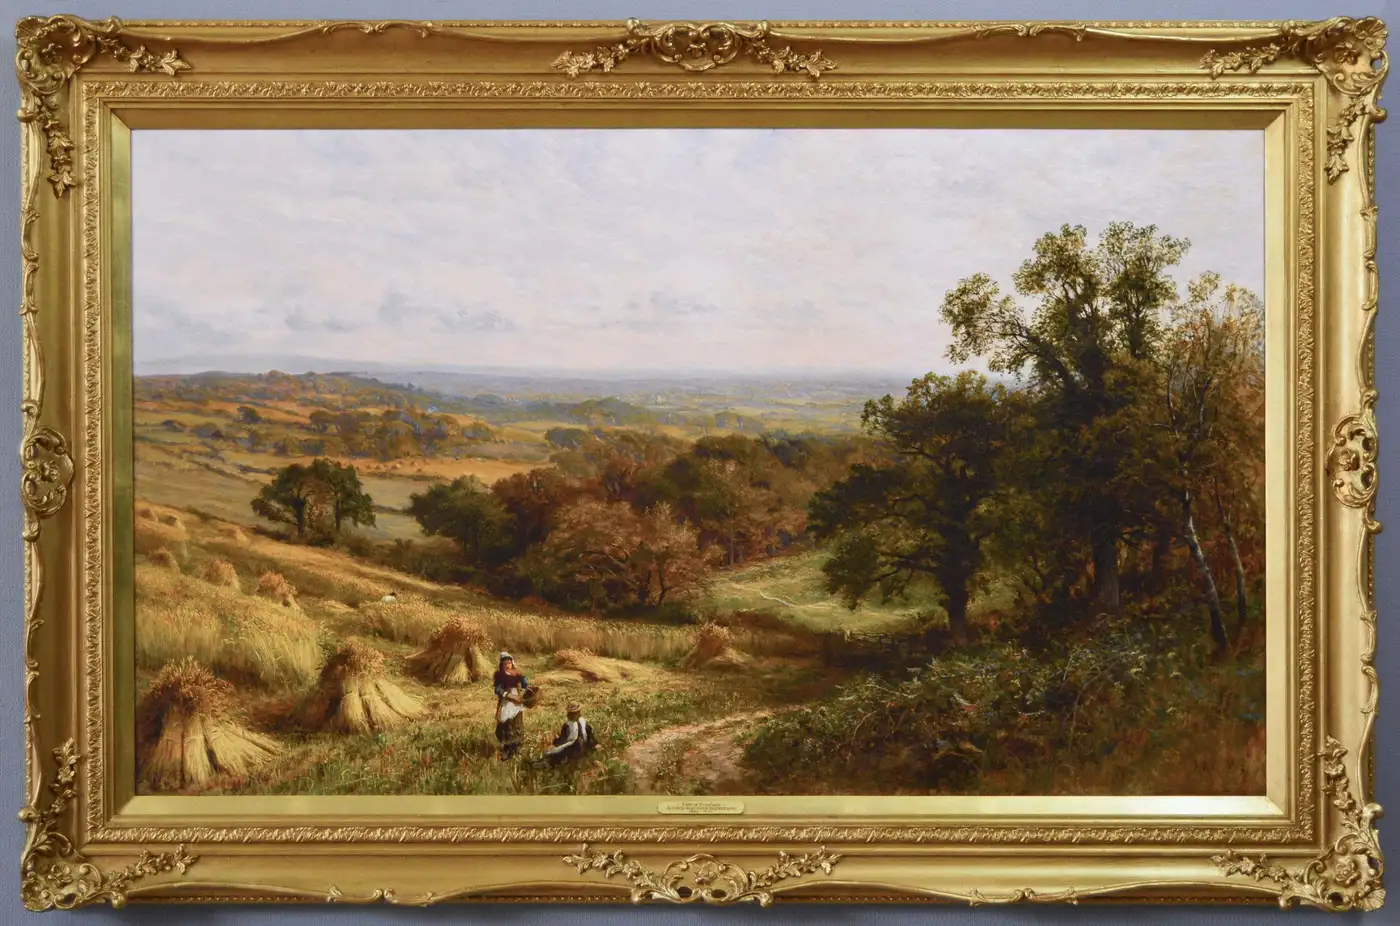 A painting by Alfred Augustus Glendening, Sr. To paint a scene like this is one of my art goals.